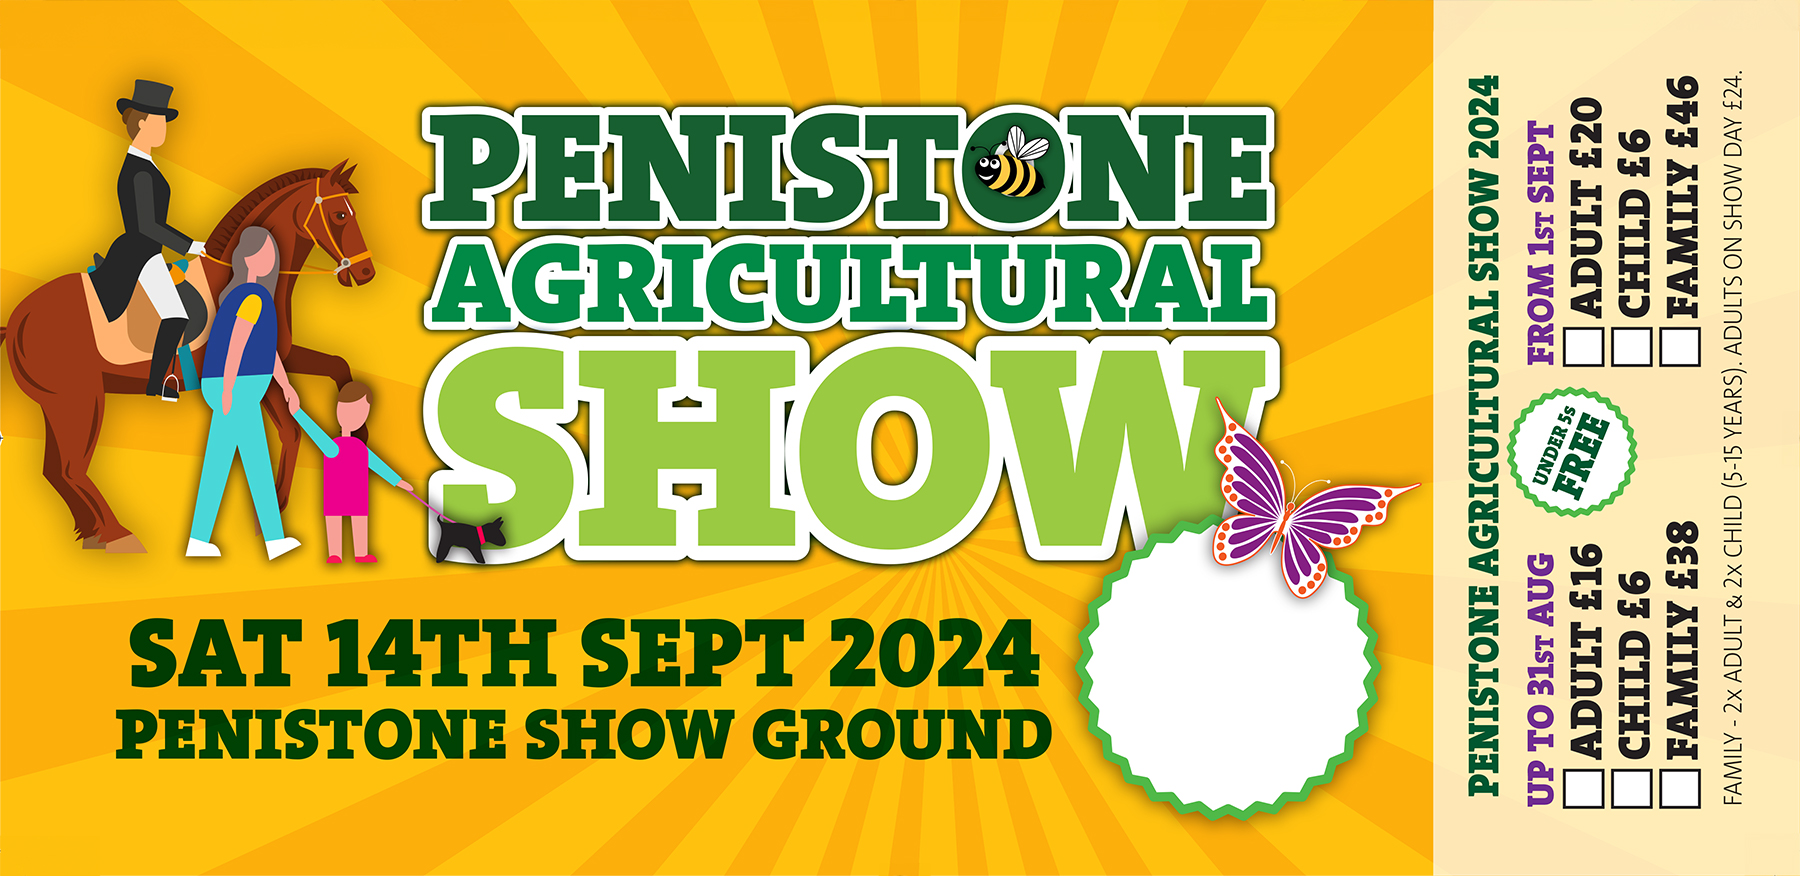 Penistone Agricultural Show 2024 Ticket